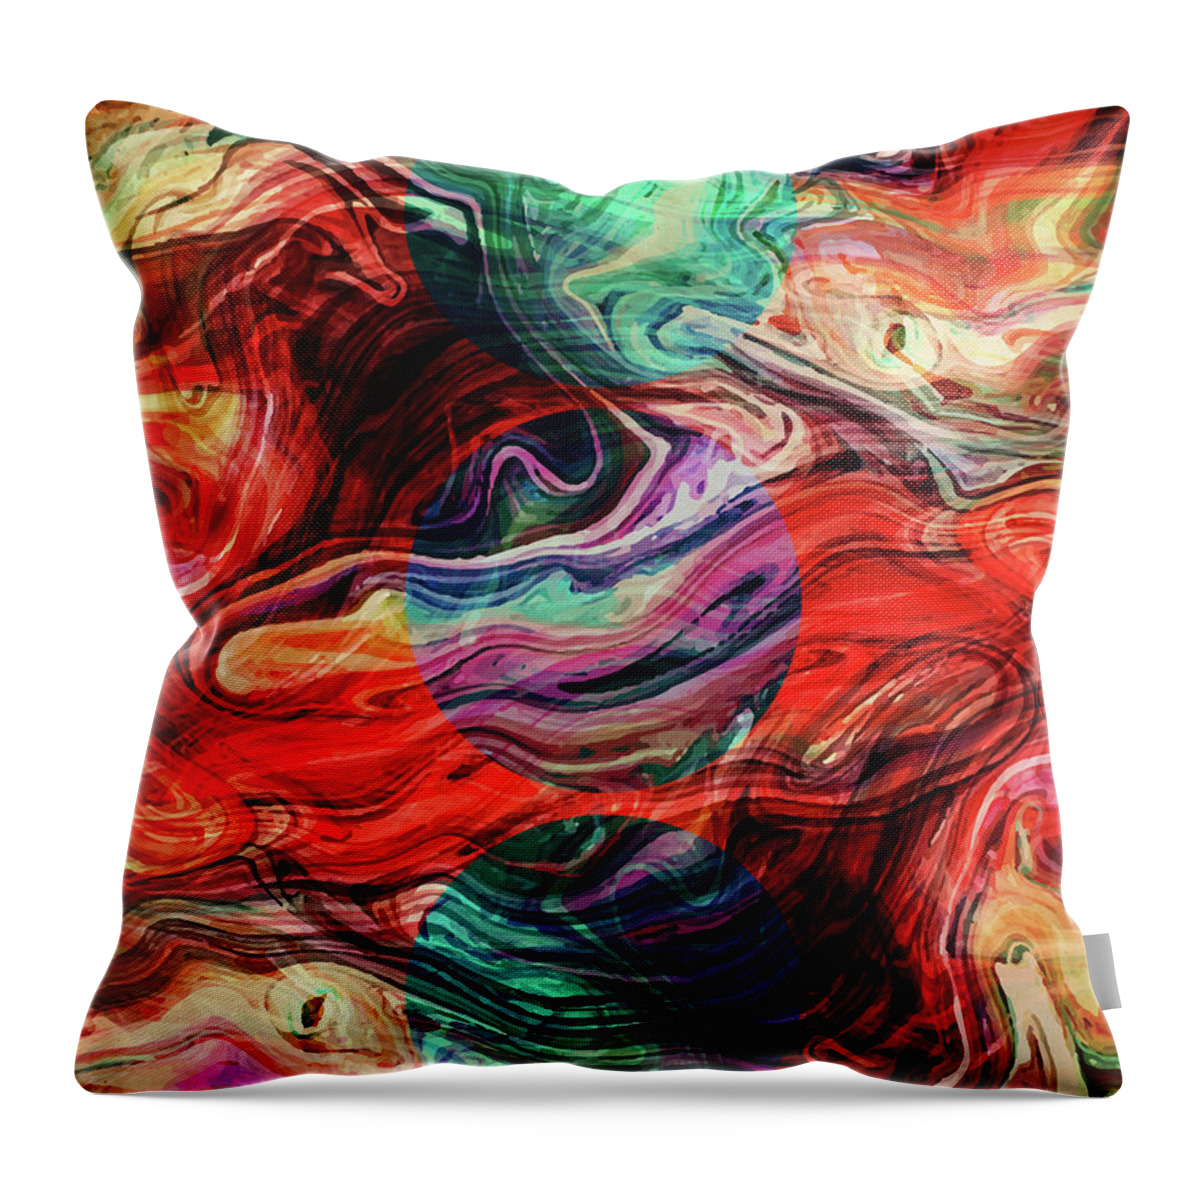 Abstract Throw Pillow featuring the mixed media Abstract Painting - Fluid Painting 01 - Red, Blue, Orange, Green - Modern Abstract Painting - Flow by Studio Grafiikka